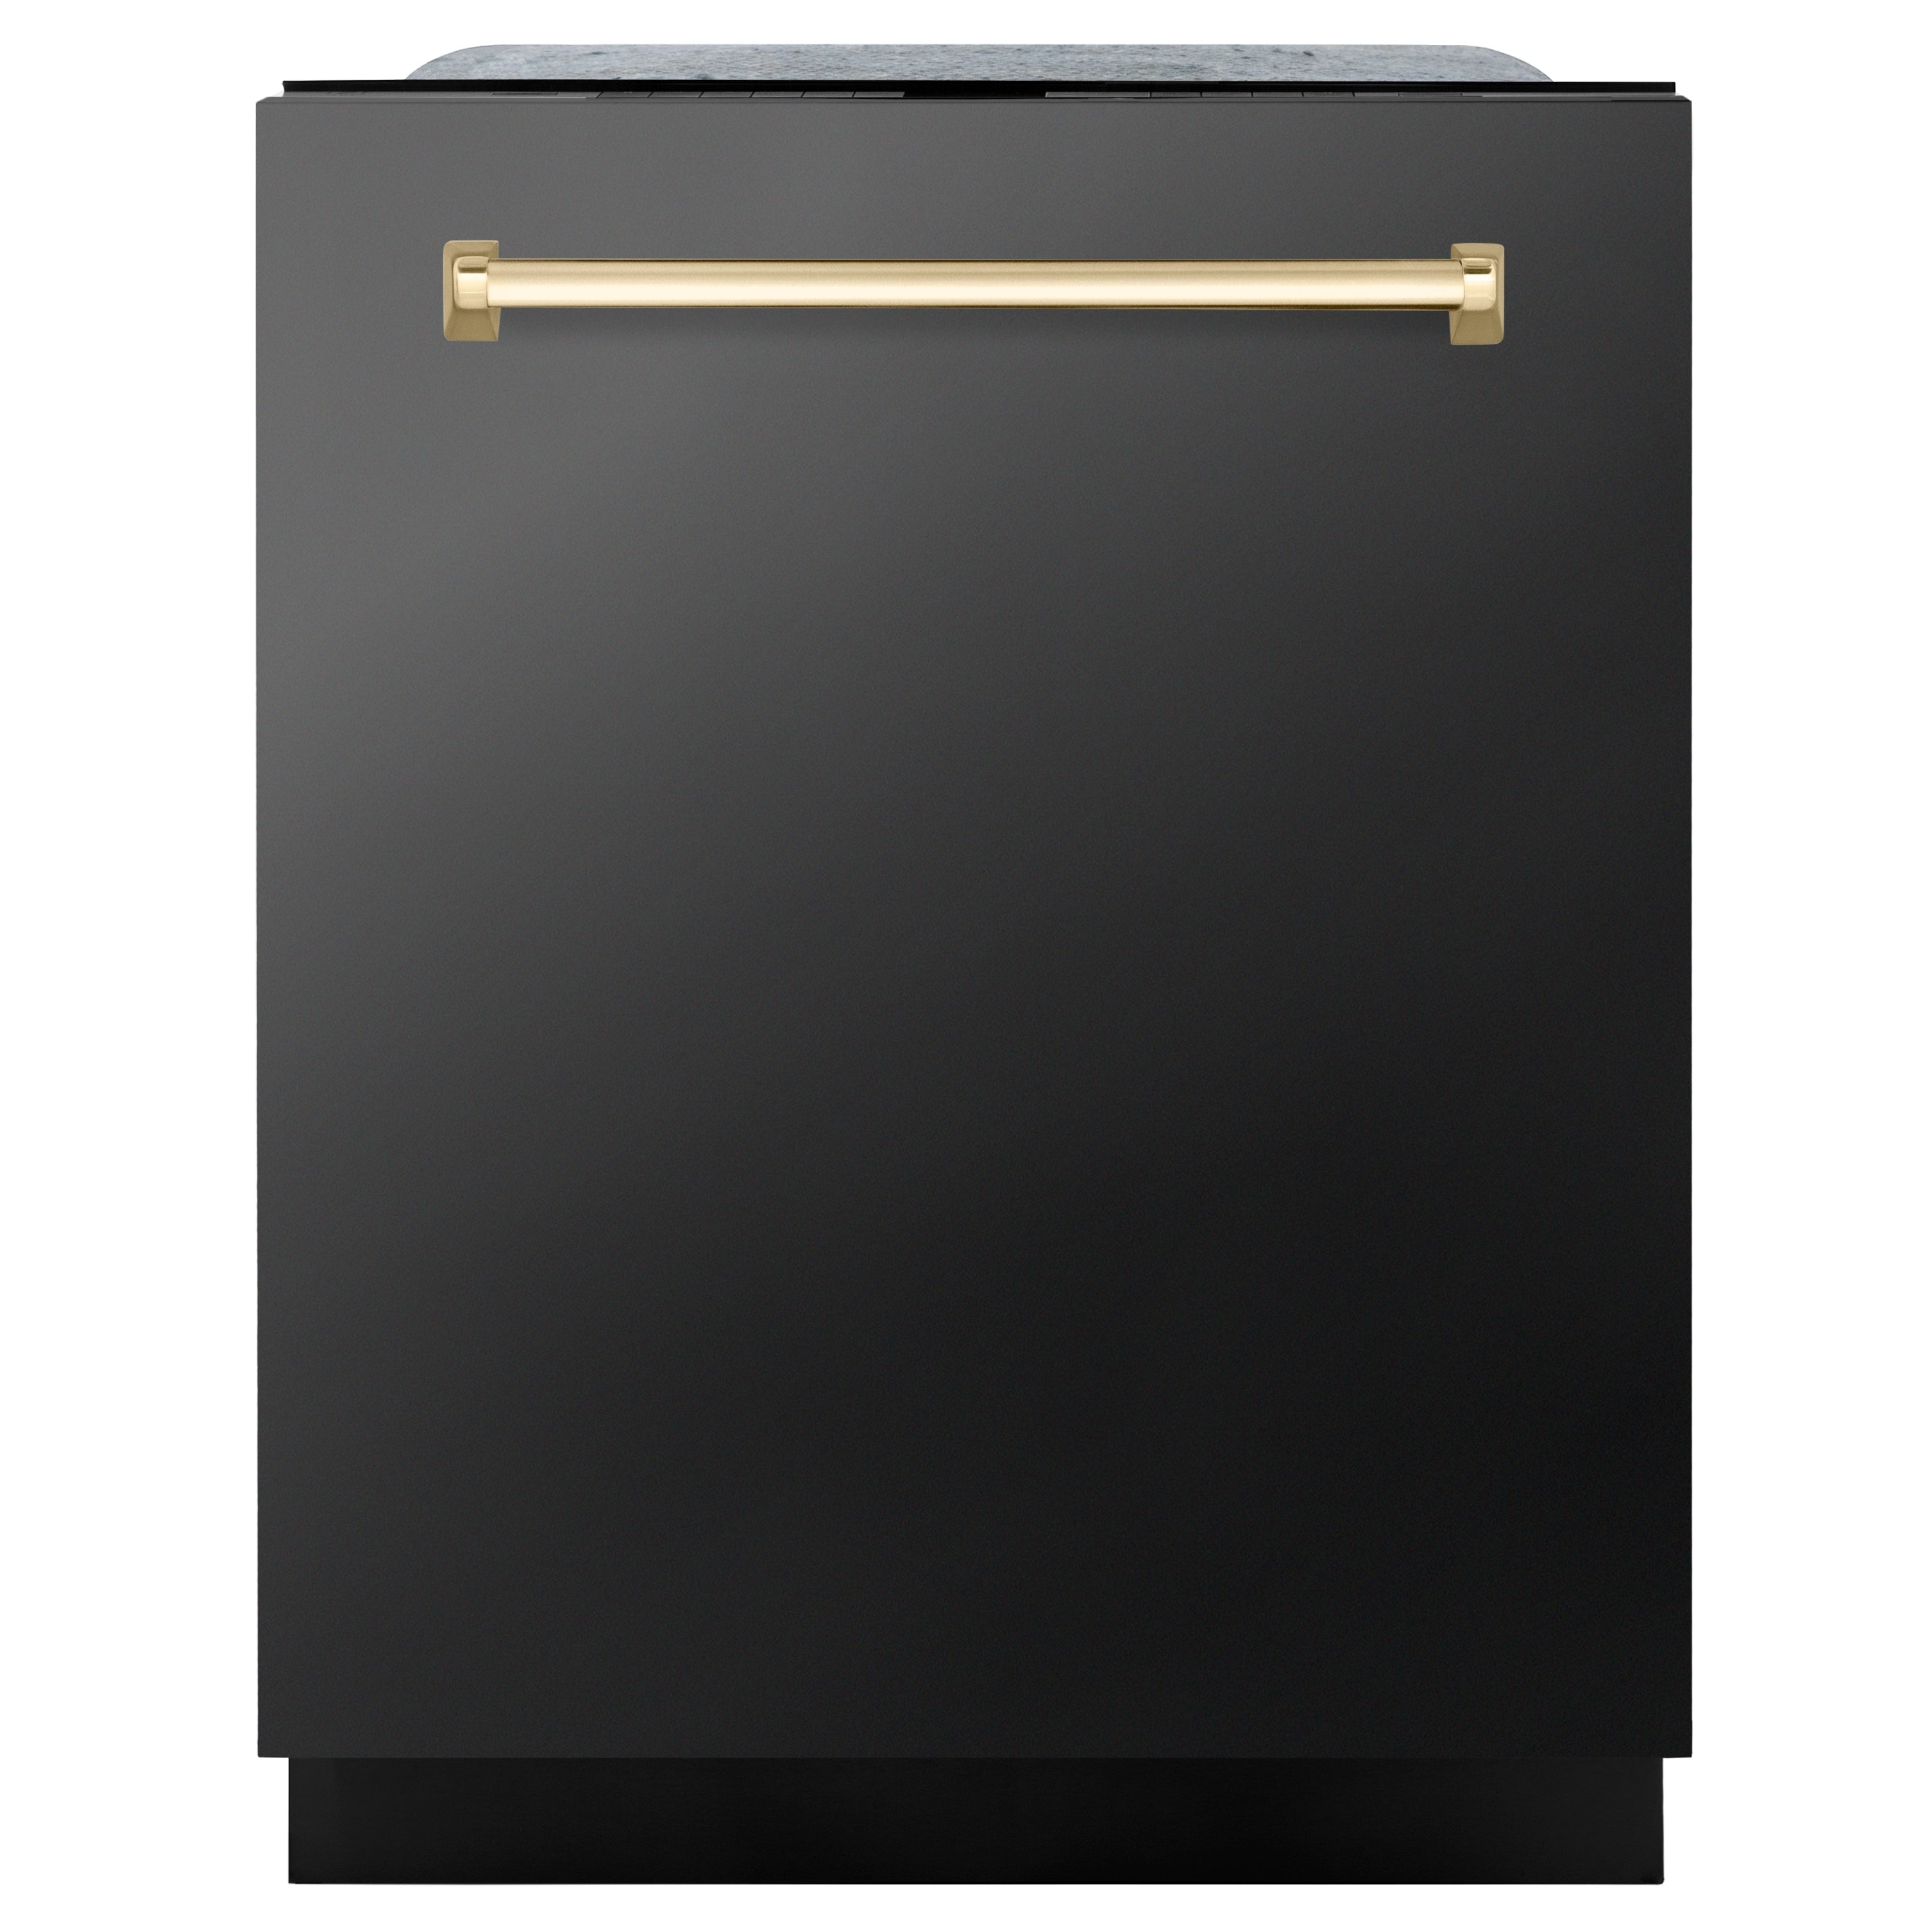 Zline Kitchen and Bath ZLINE Autograph Edition 24" 3rd Rack Top Touch Control Tall Tub Dishwasher in Black Stainless Steel with Handle